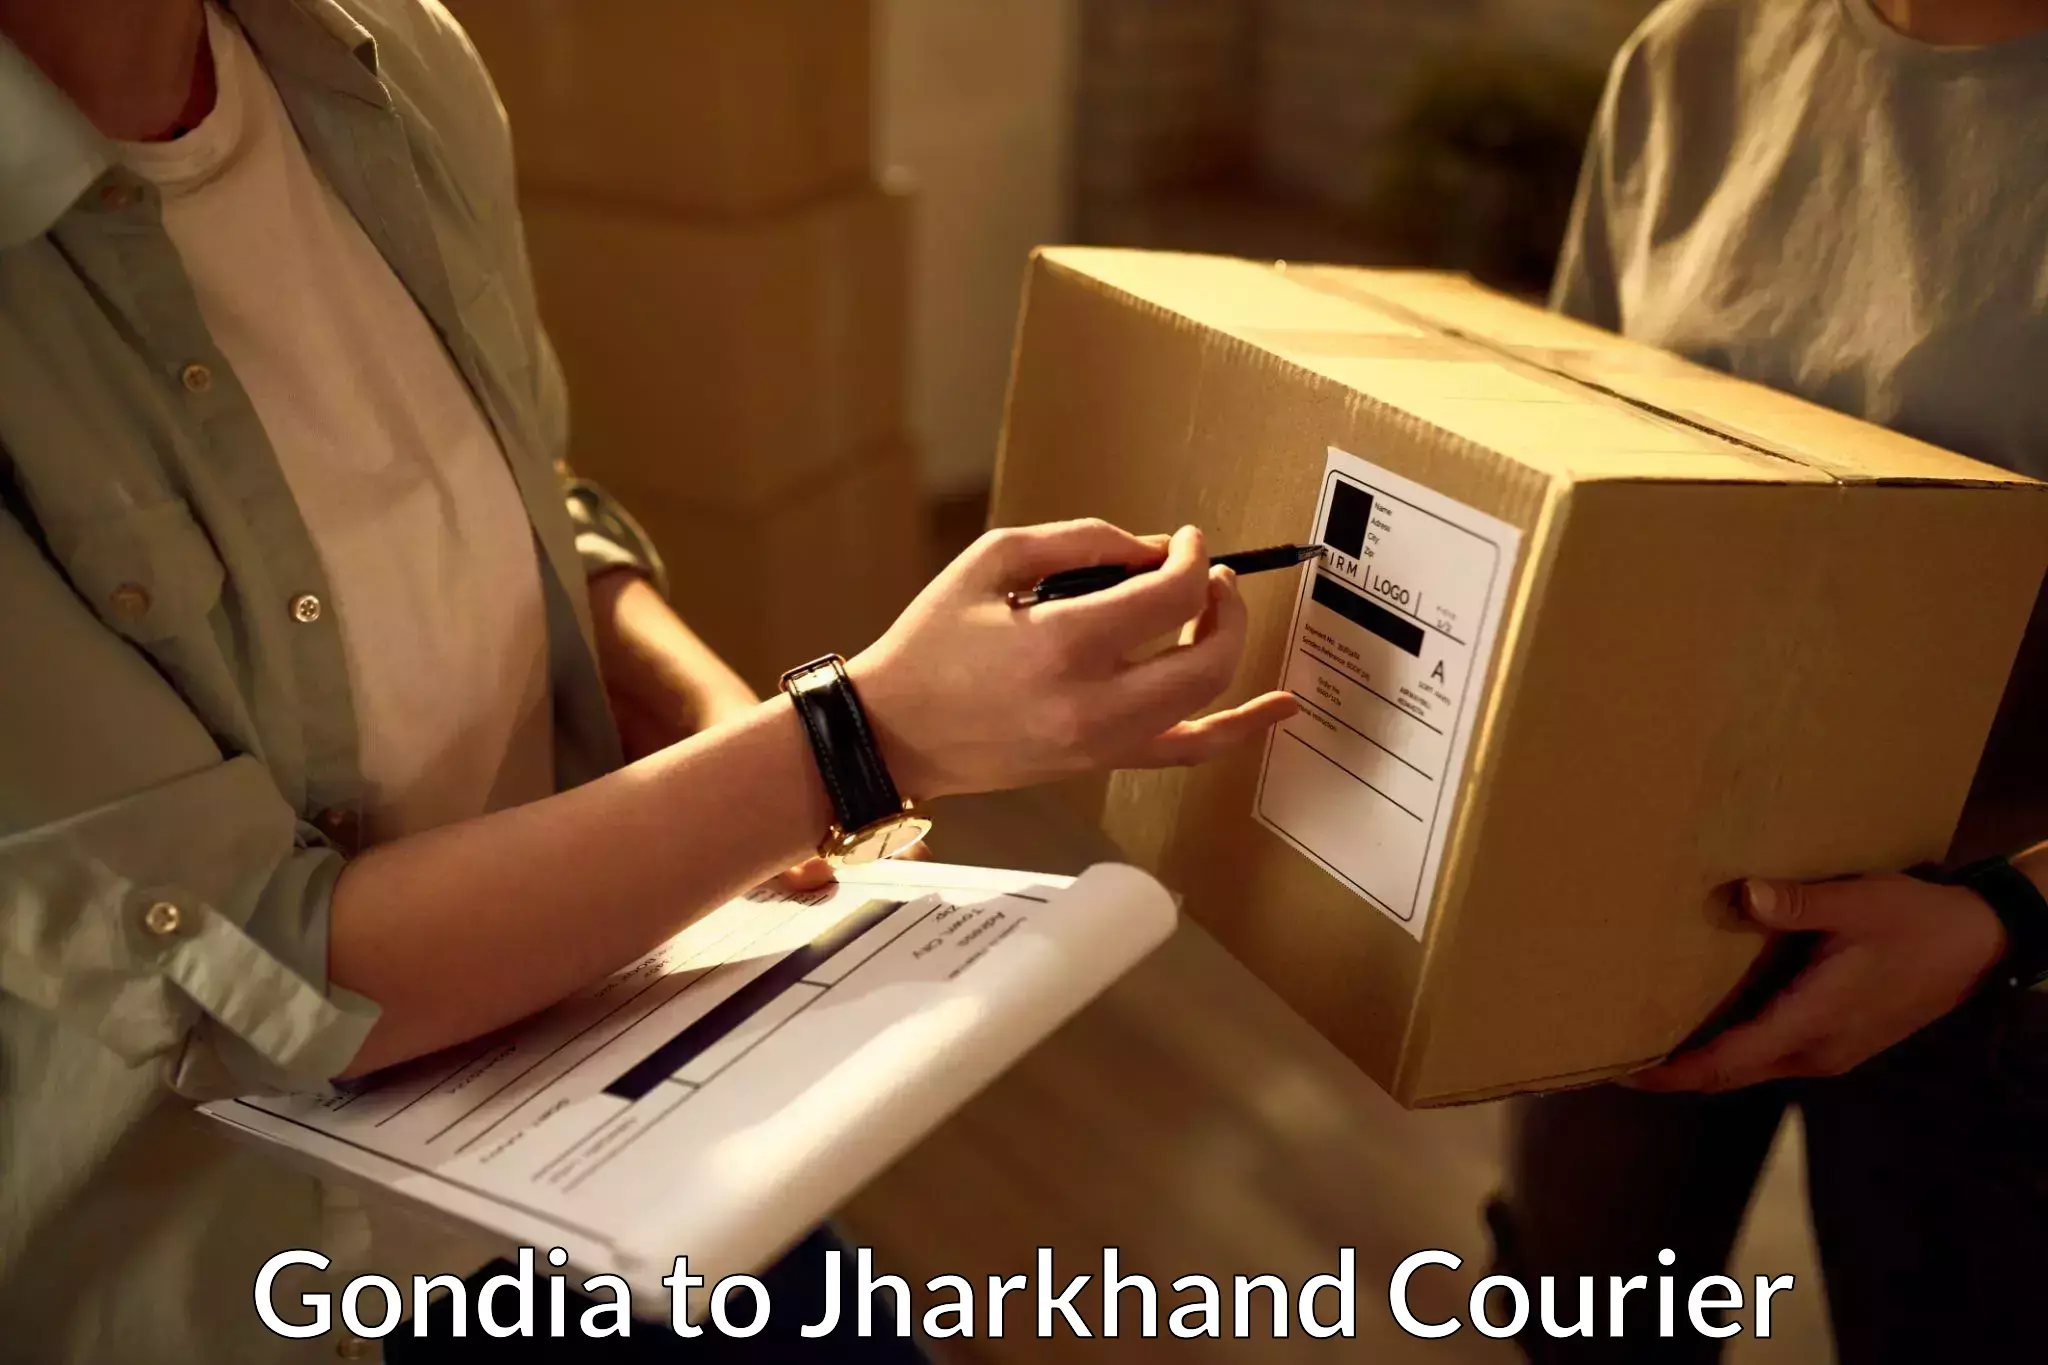 Reliable delivery network Gondia to Jharkhand